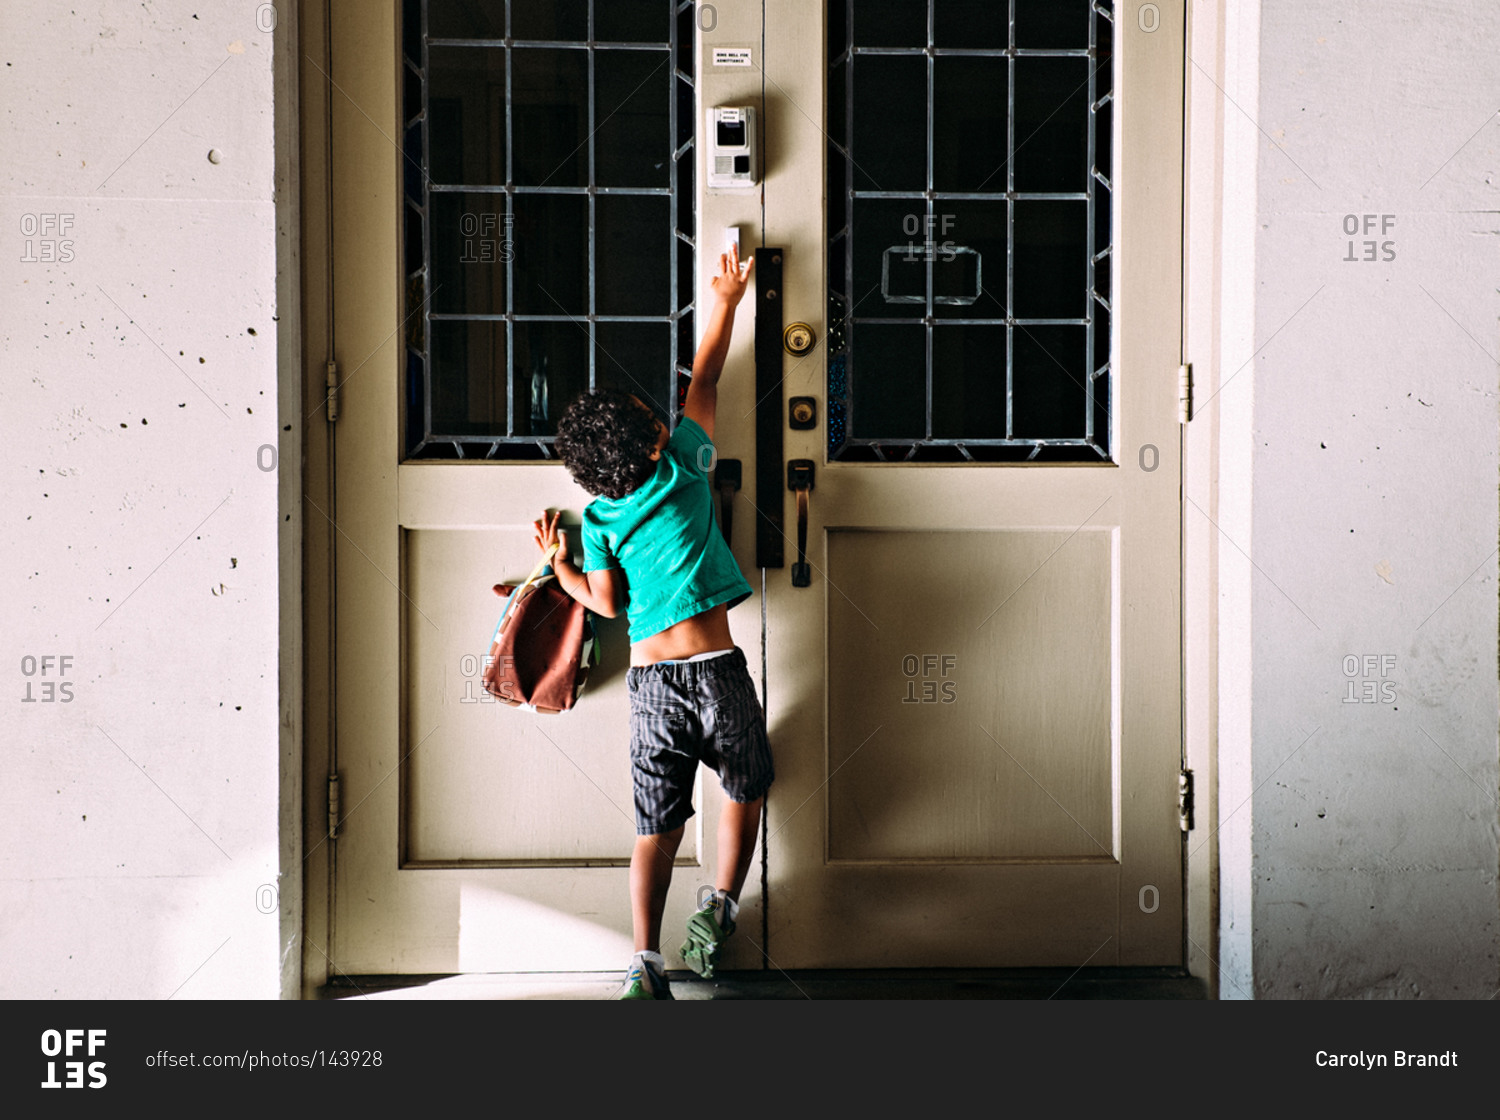 A boy reaches up to ring a doorbell